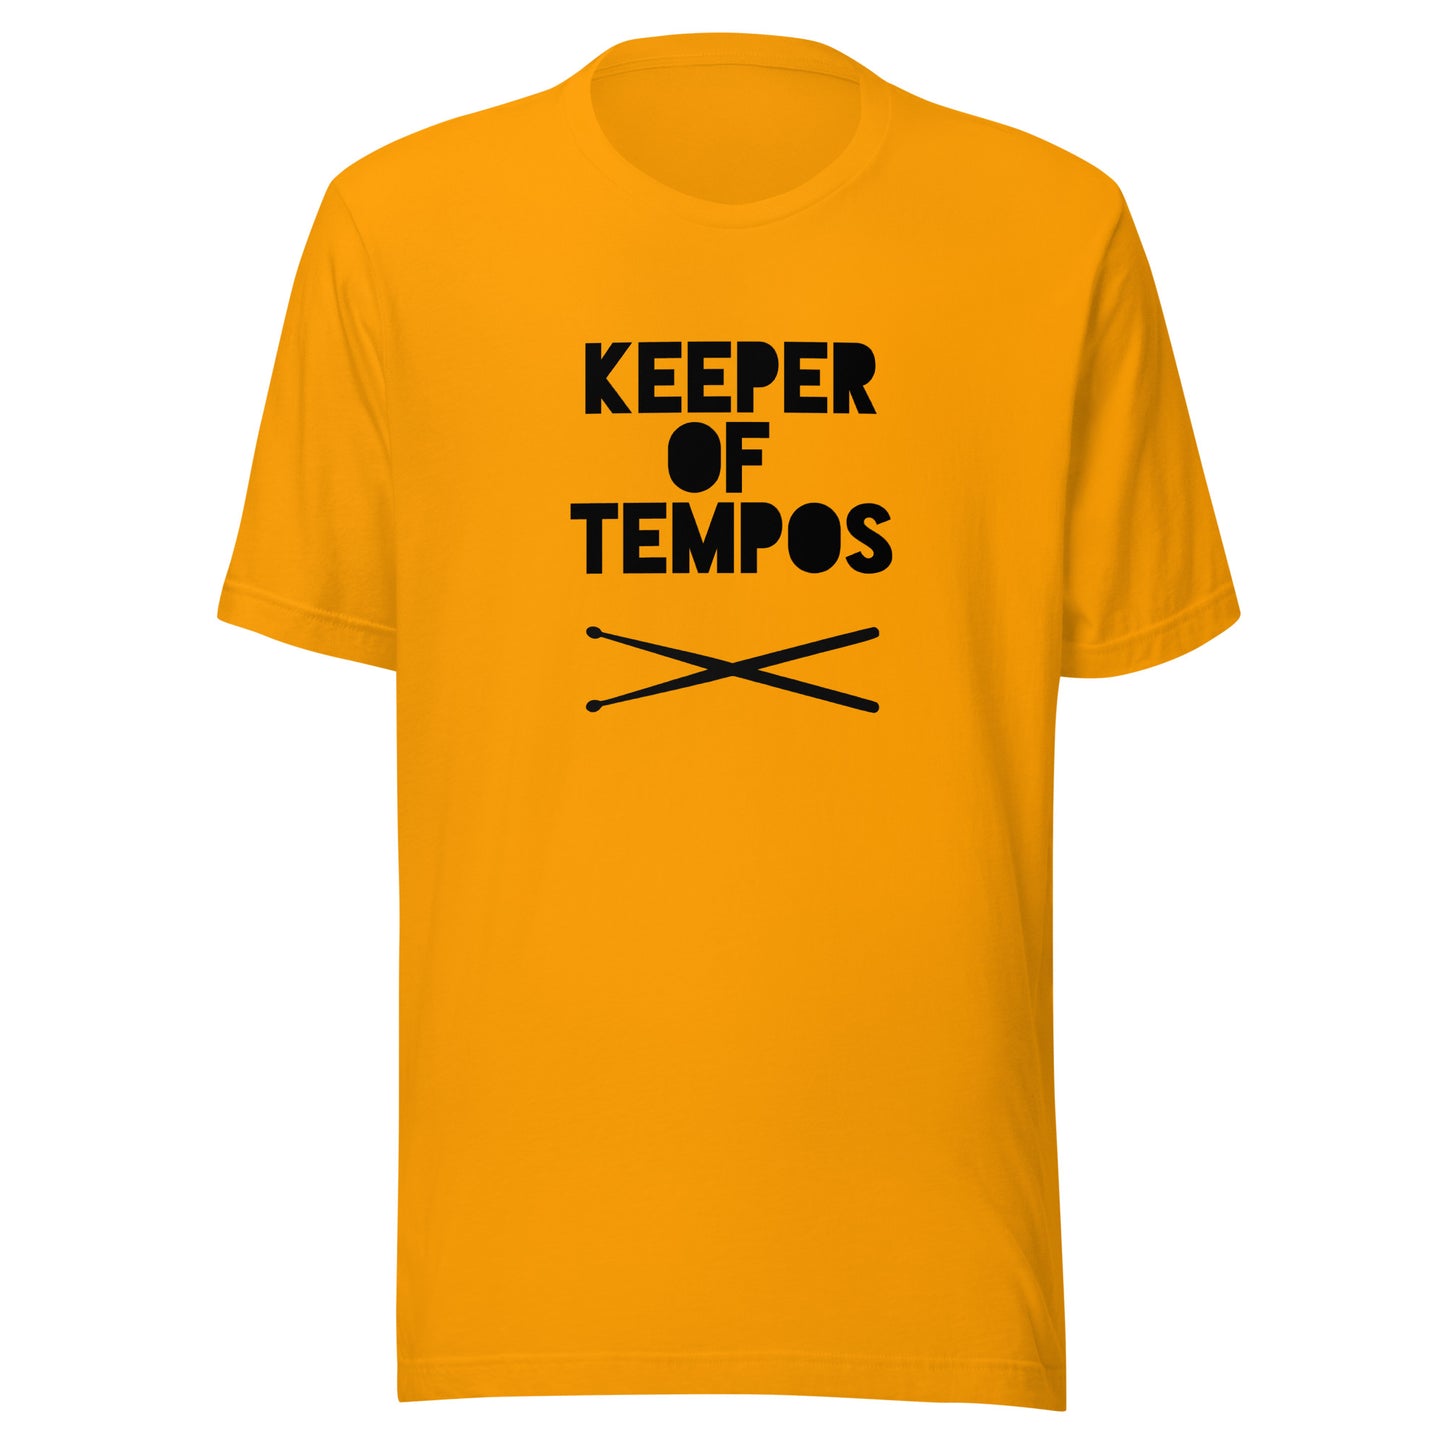 Keeper of Tempos